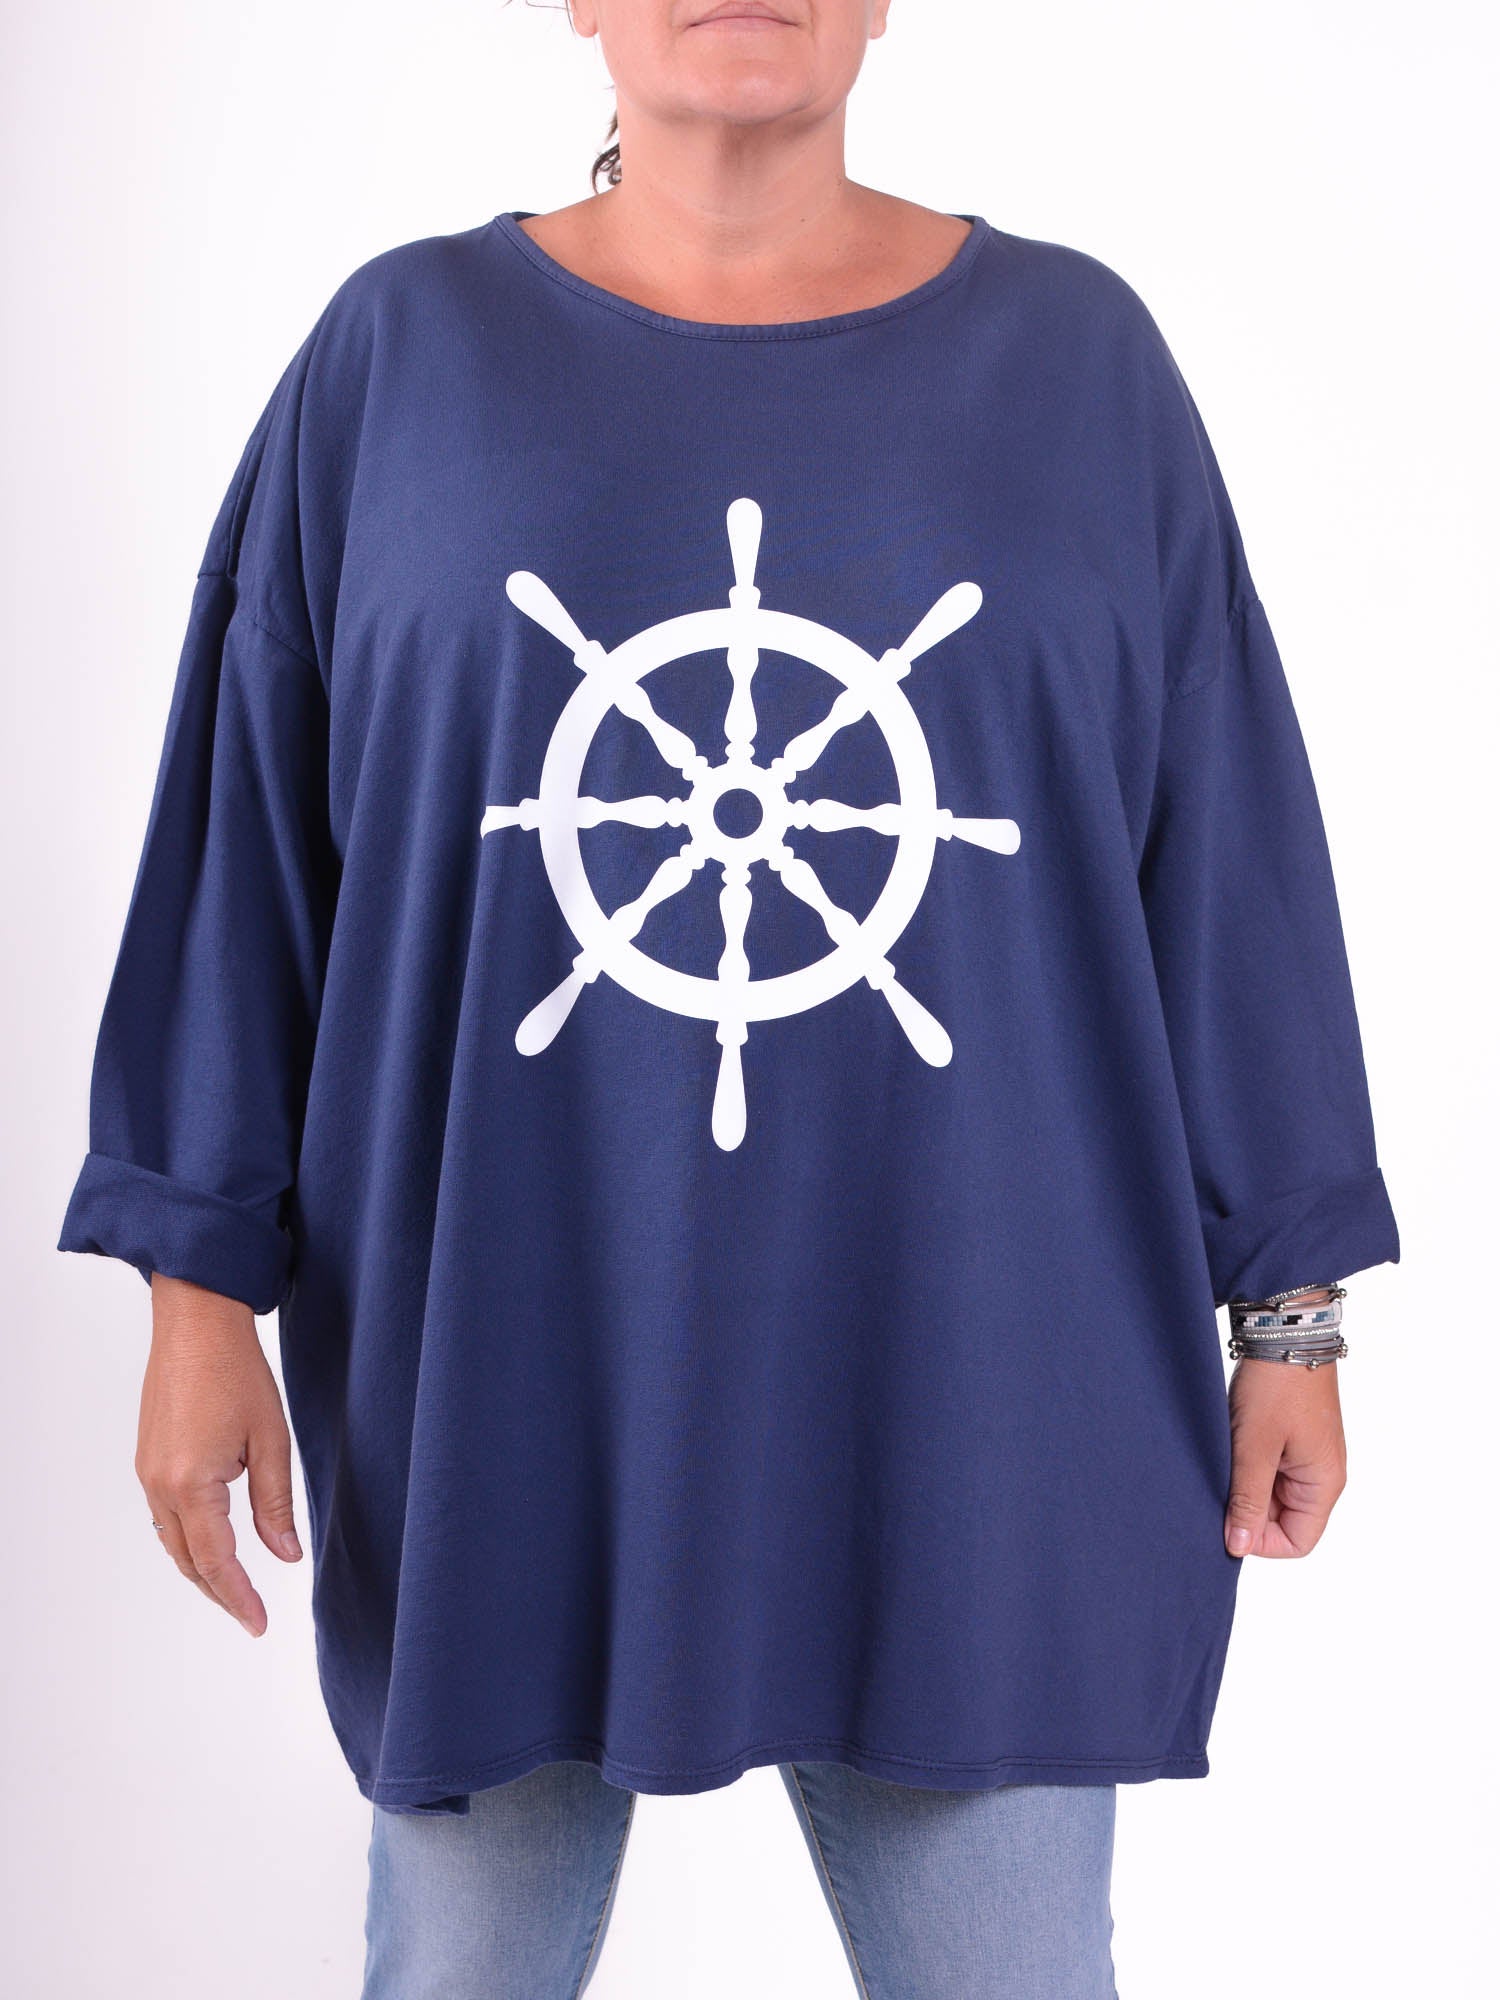 Basic Oversized Top with Nautical Wheel Print - 9482 Wheel, Tops & Shirts, Pure Plus Clothing, Lagenlook Clothing, Plus Size Fashion, Over 50 Fashion